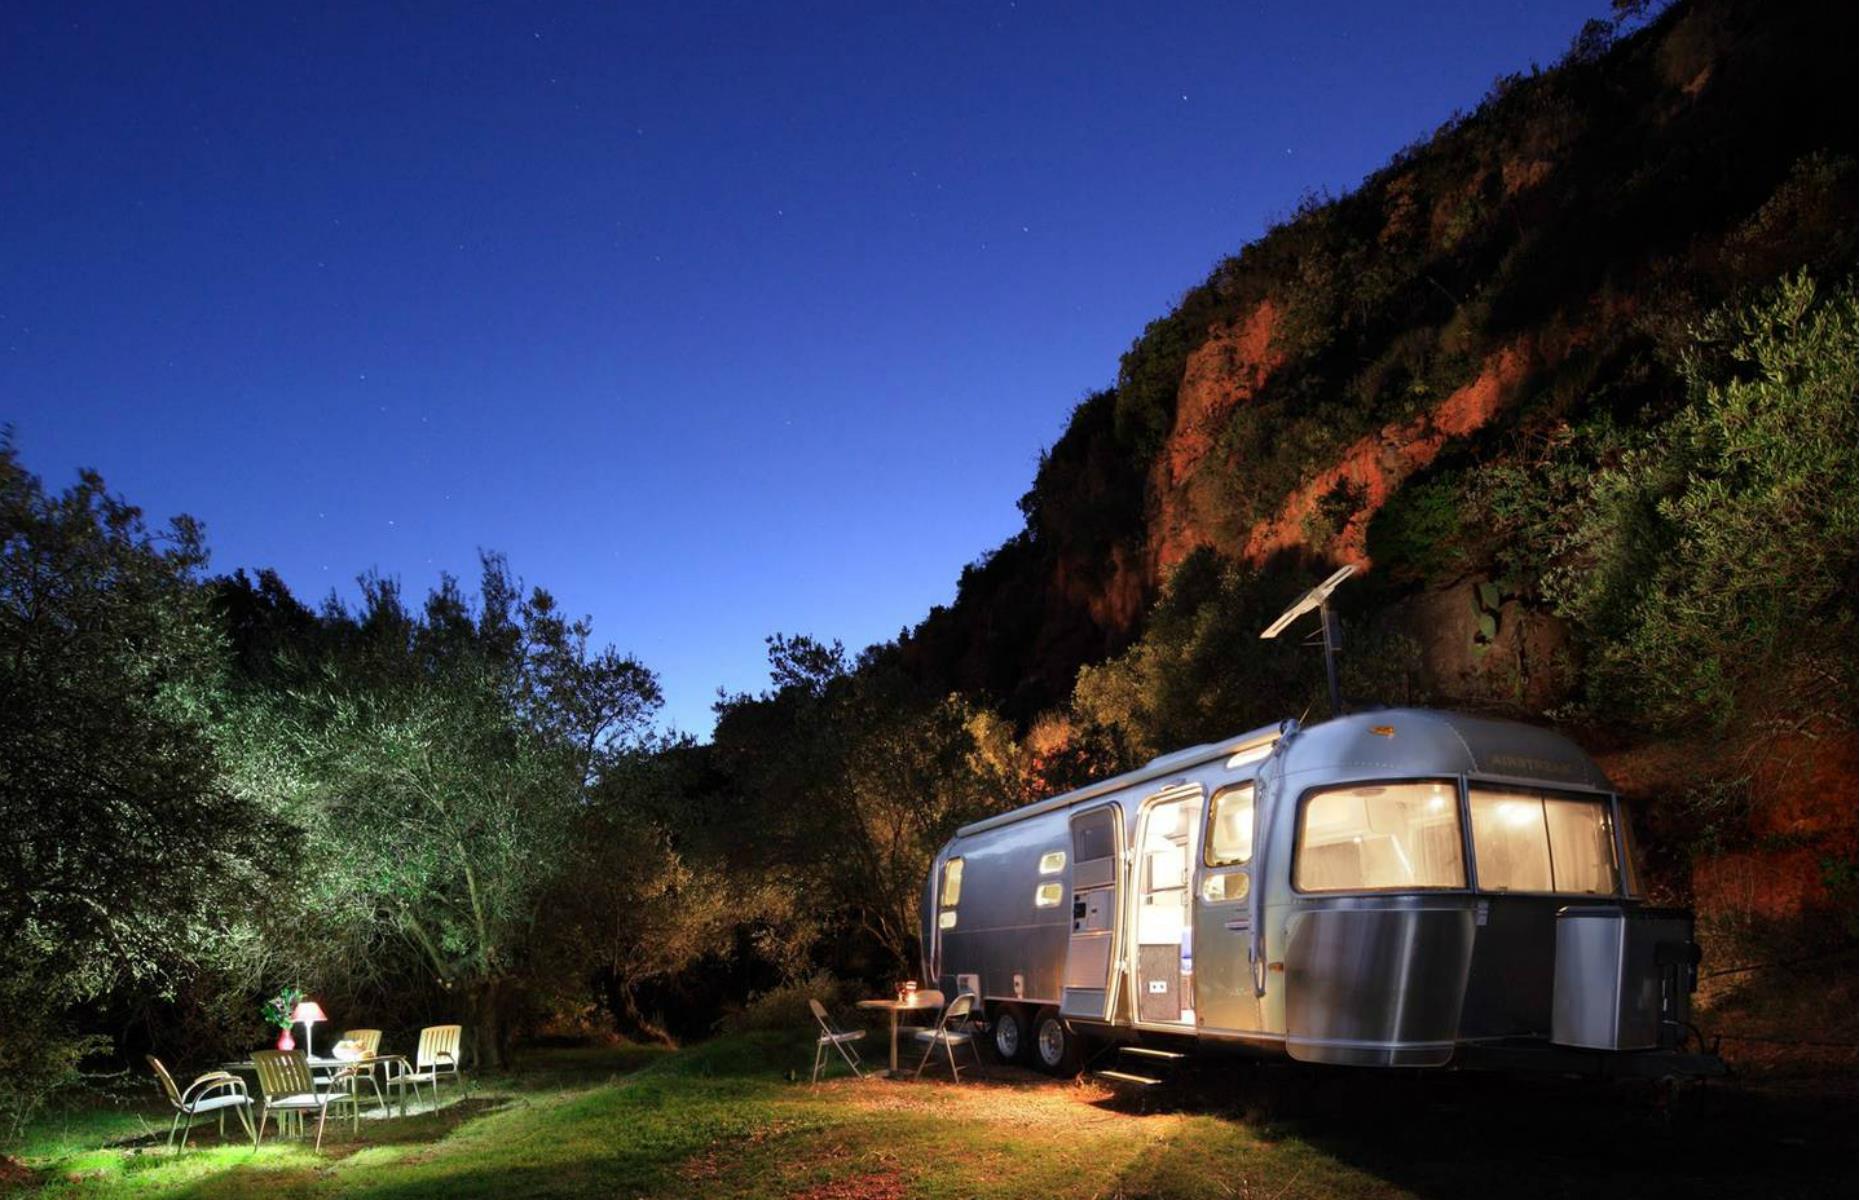 <p>Located within the Sierra de las Nieves mountain range in southern Spain, this modernised <a href="https://www.airbnb.co.uk/rooms/434469?guests=1&adults=1#neighborhood">Airstream</a> offers comfort, tranquillity and luxury in the heart of nature. You'll find a number of trails and treks while Malaga, Marbella and Seville are all close by. There’s a flatscreen TV, wifi and surround-sound speakers for entertainment, but we reckon you’ll spend most of your time in the outdoor plunge pool.</p>